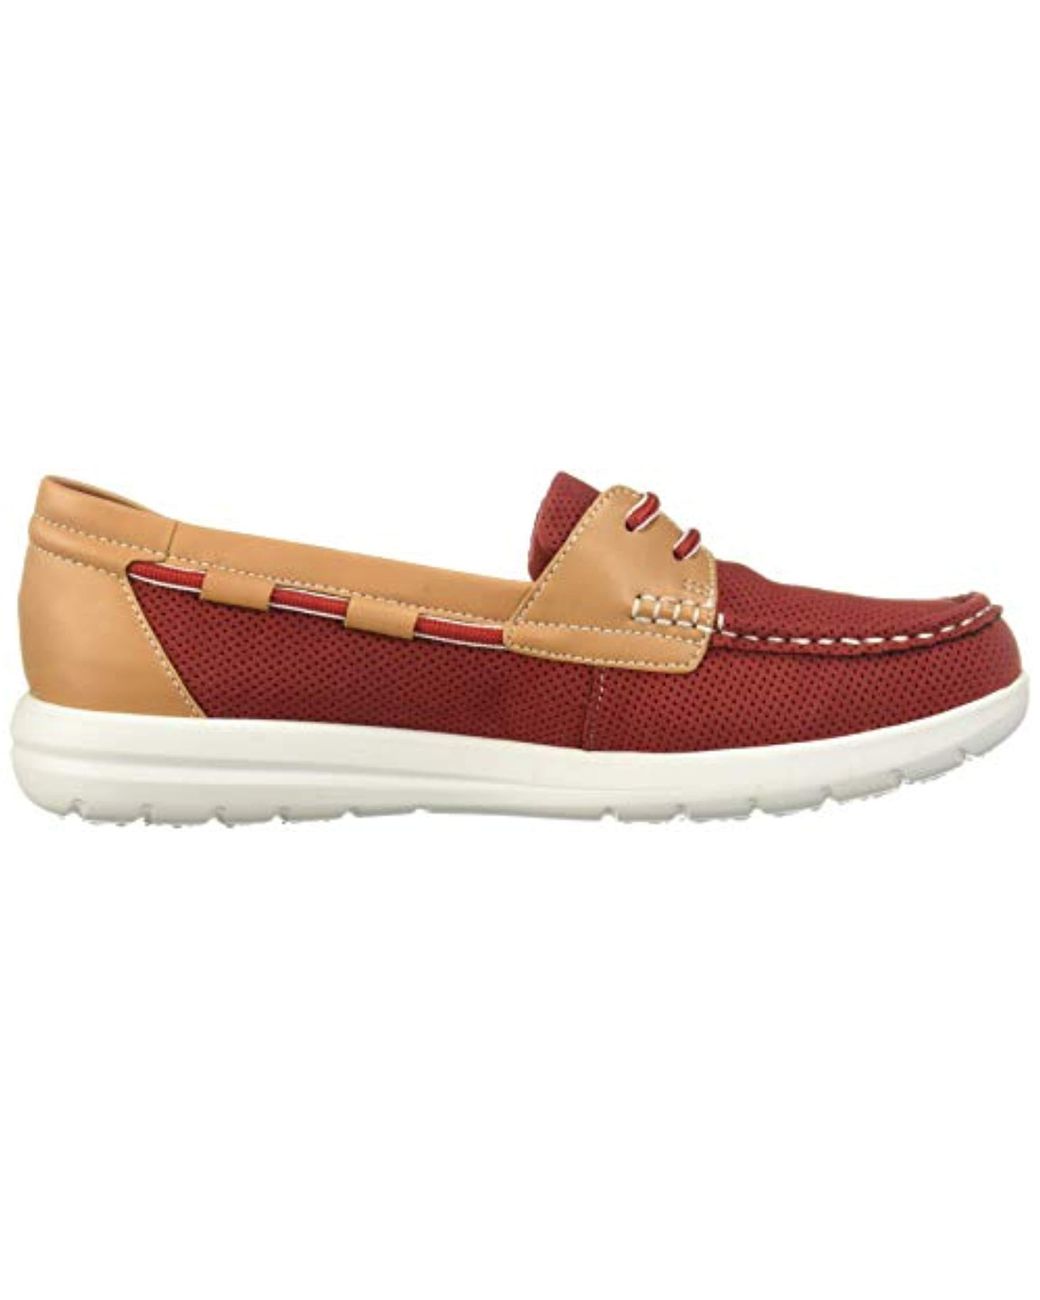 Clarks Leather Jocolin Vista Boat Shoes in Red | Lyst